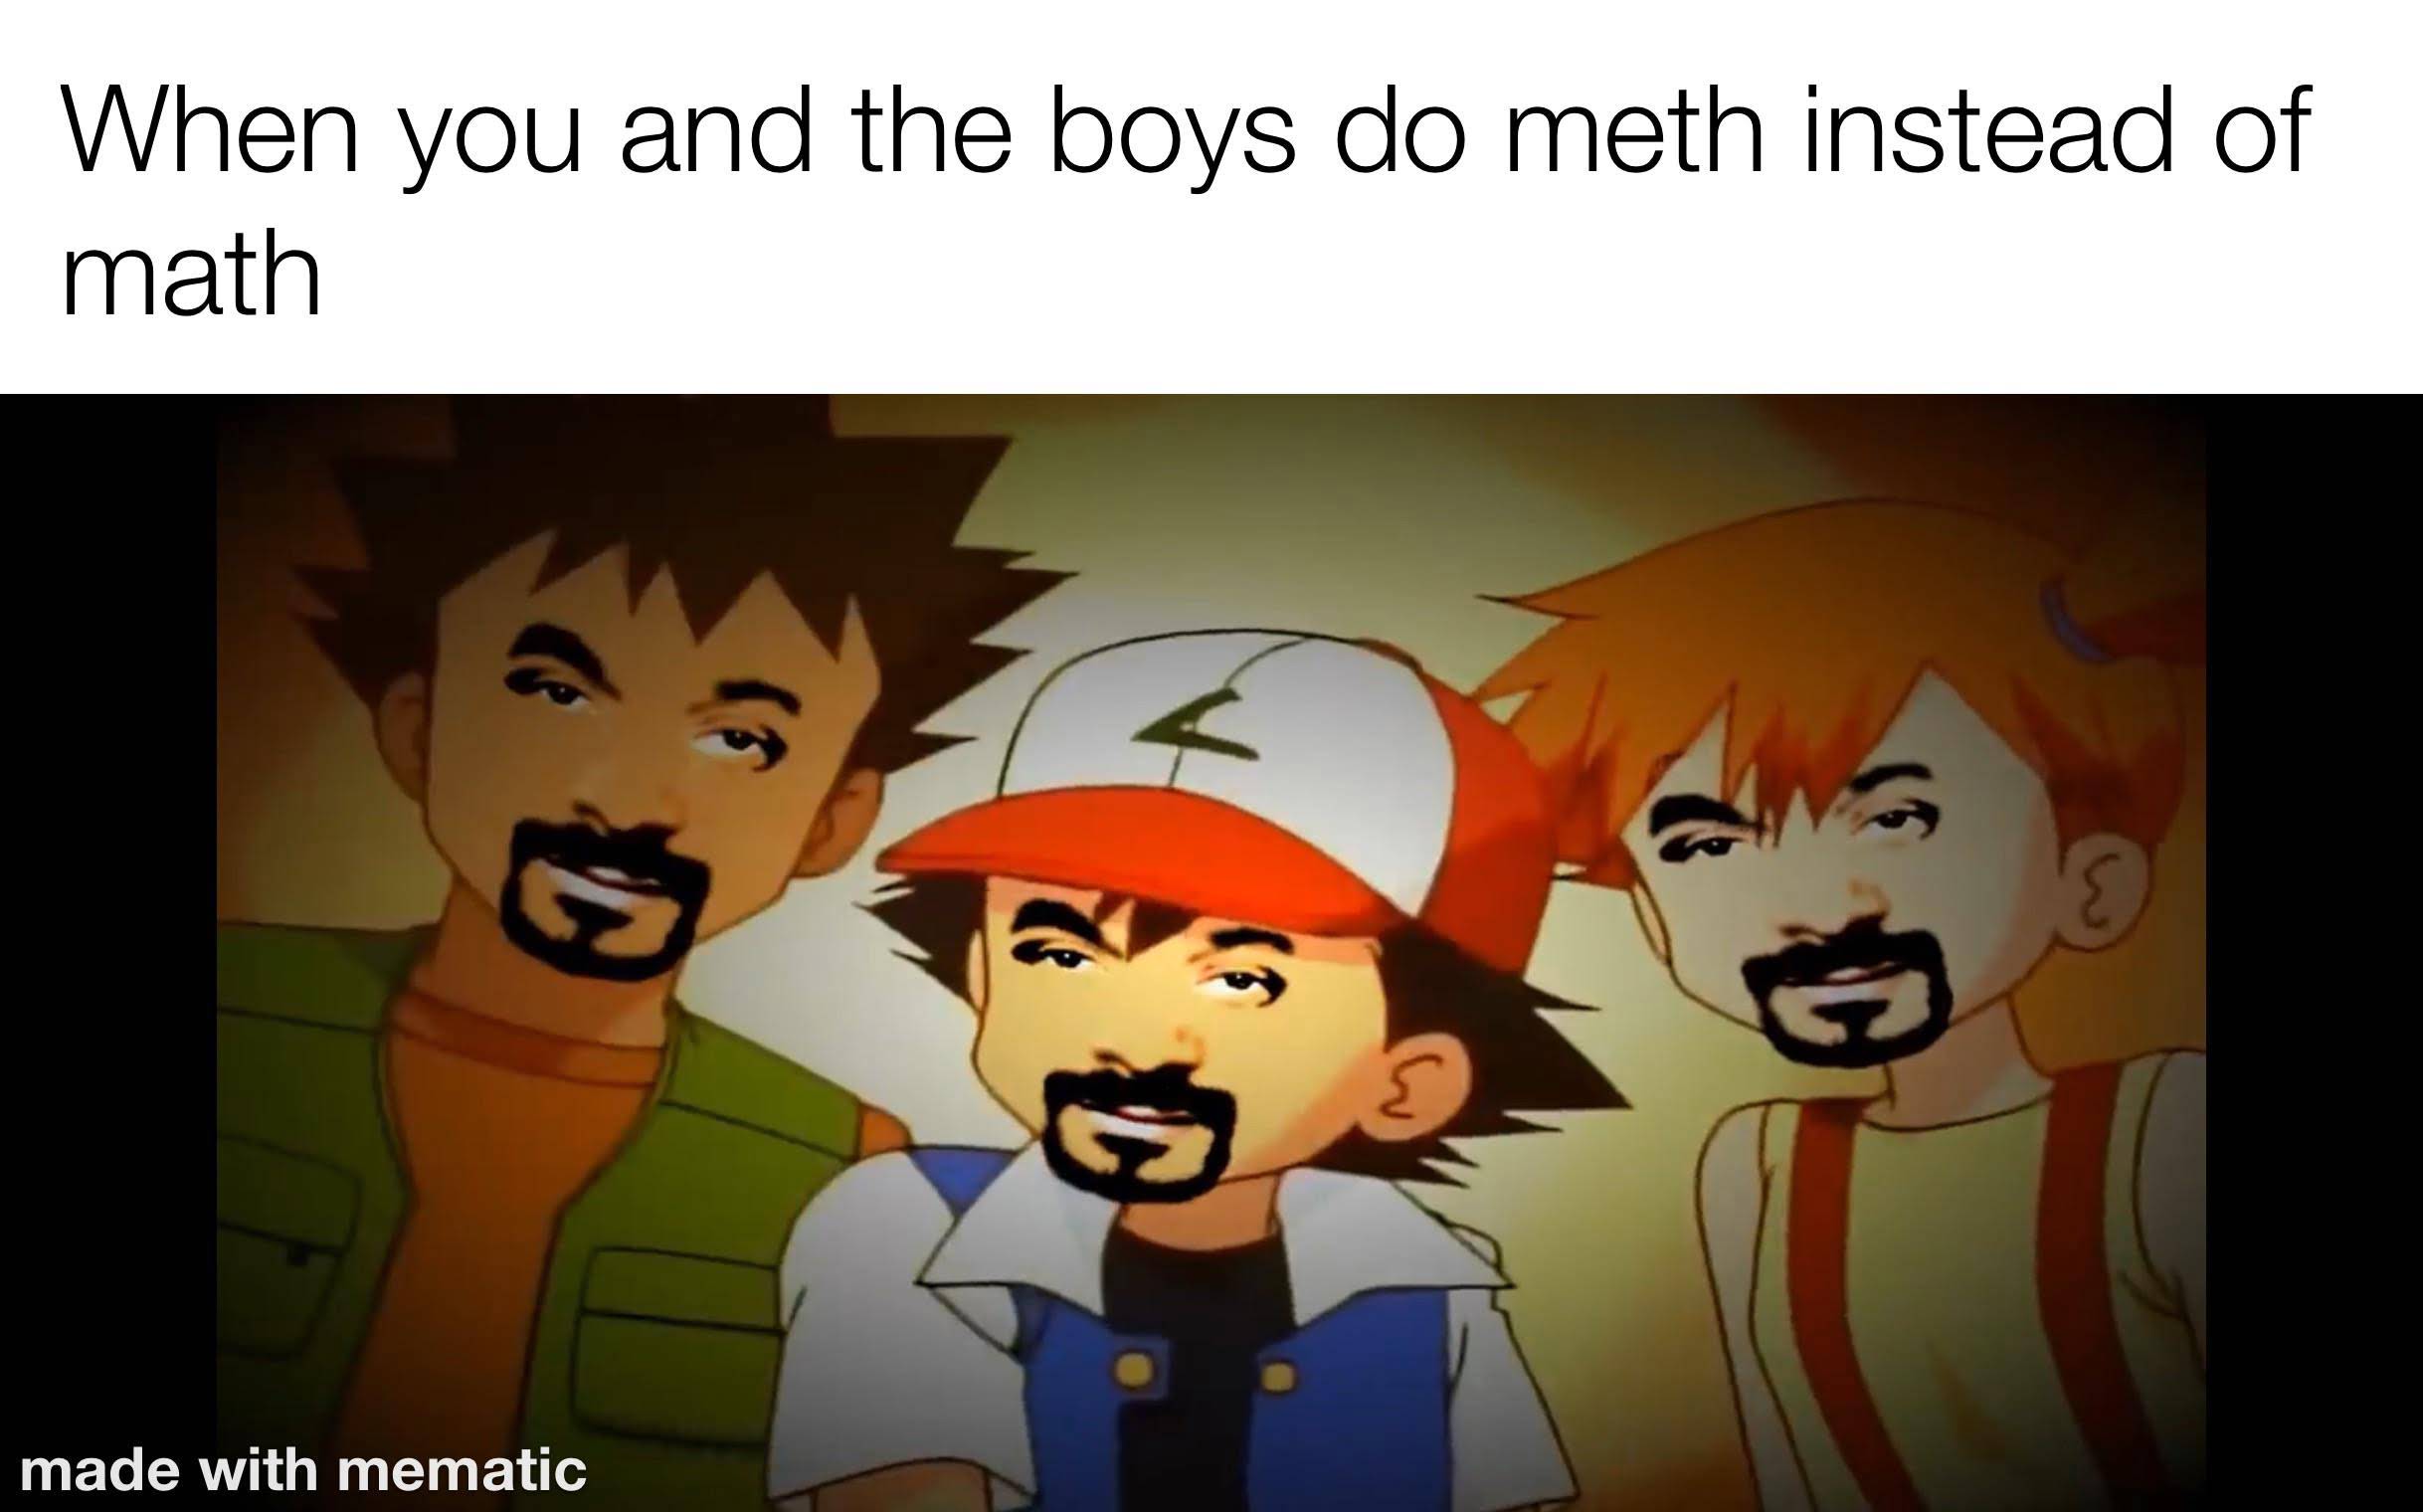 dank memes - cartoon - When you and the boys do meth instead of math C D made with mematic